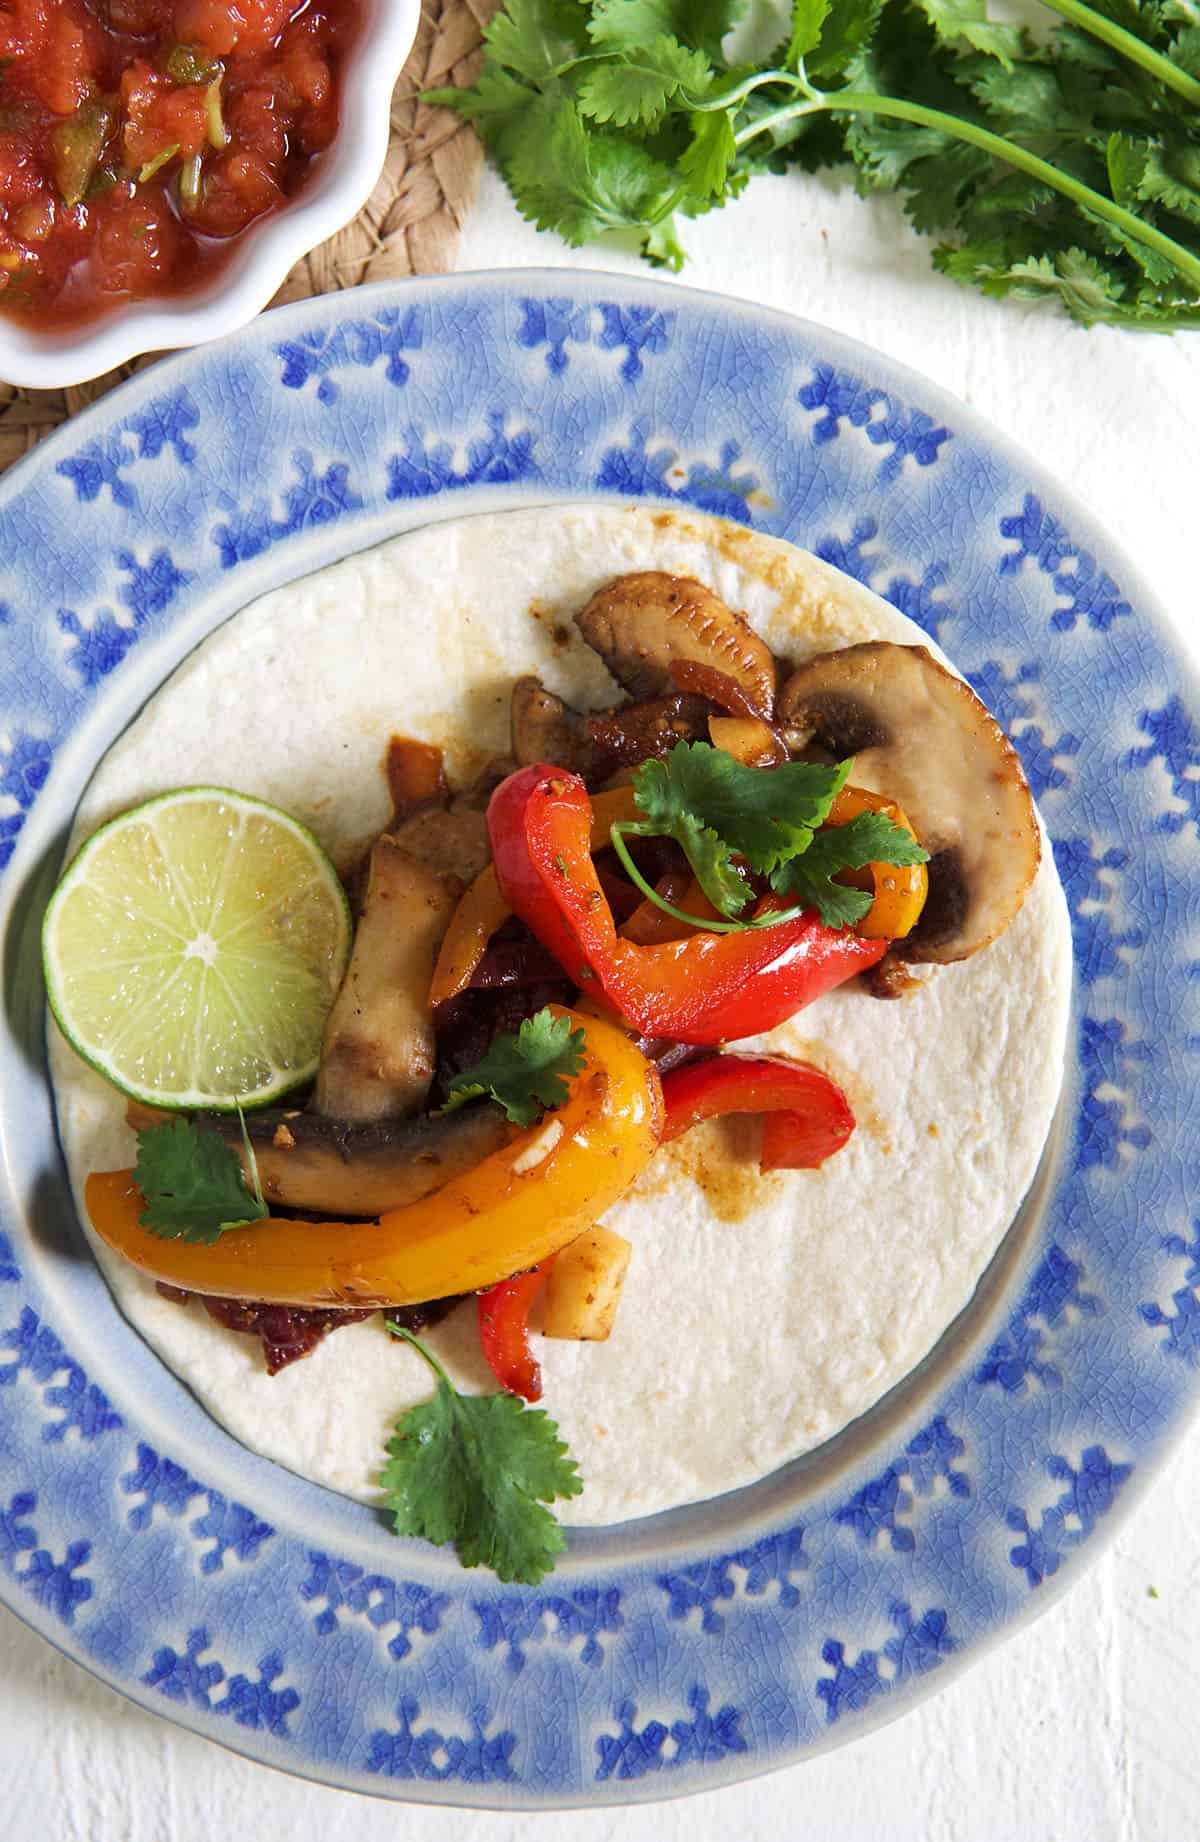 An open tortilla is filled with fajita veggies and a lime wedge.